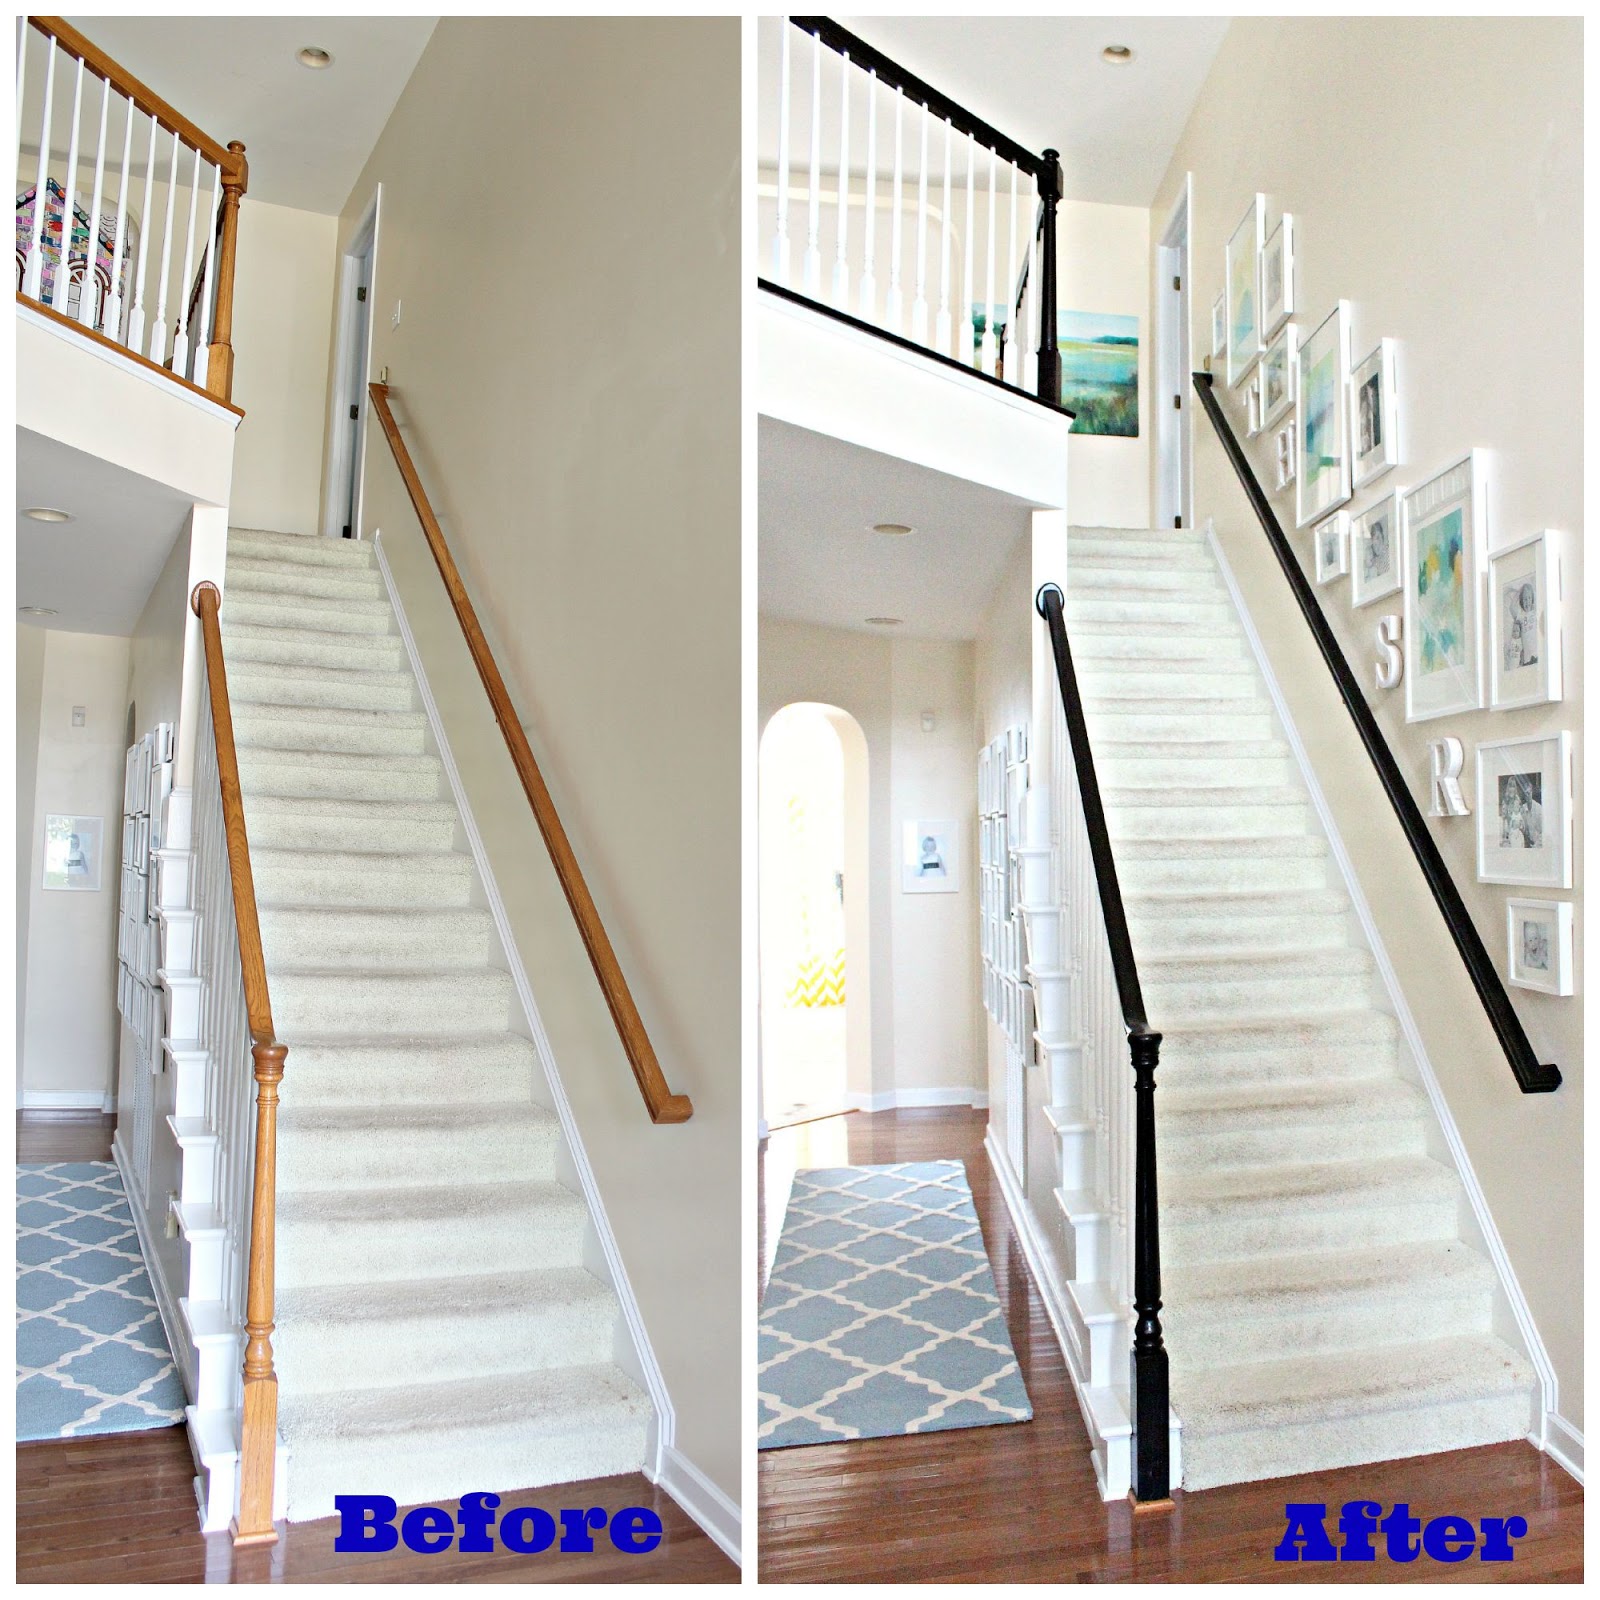 carolina on my mind: How to Stain Oak Banisters